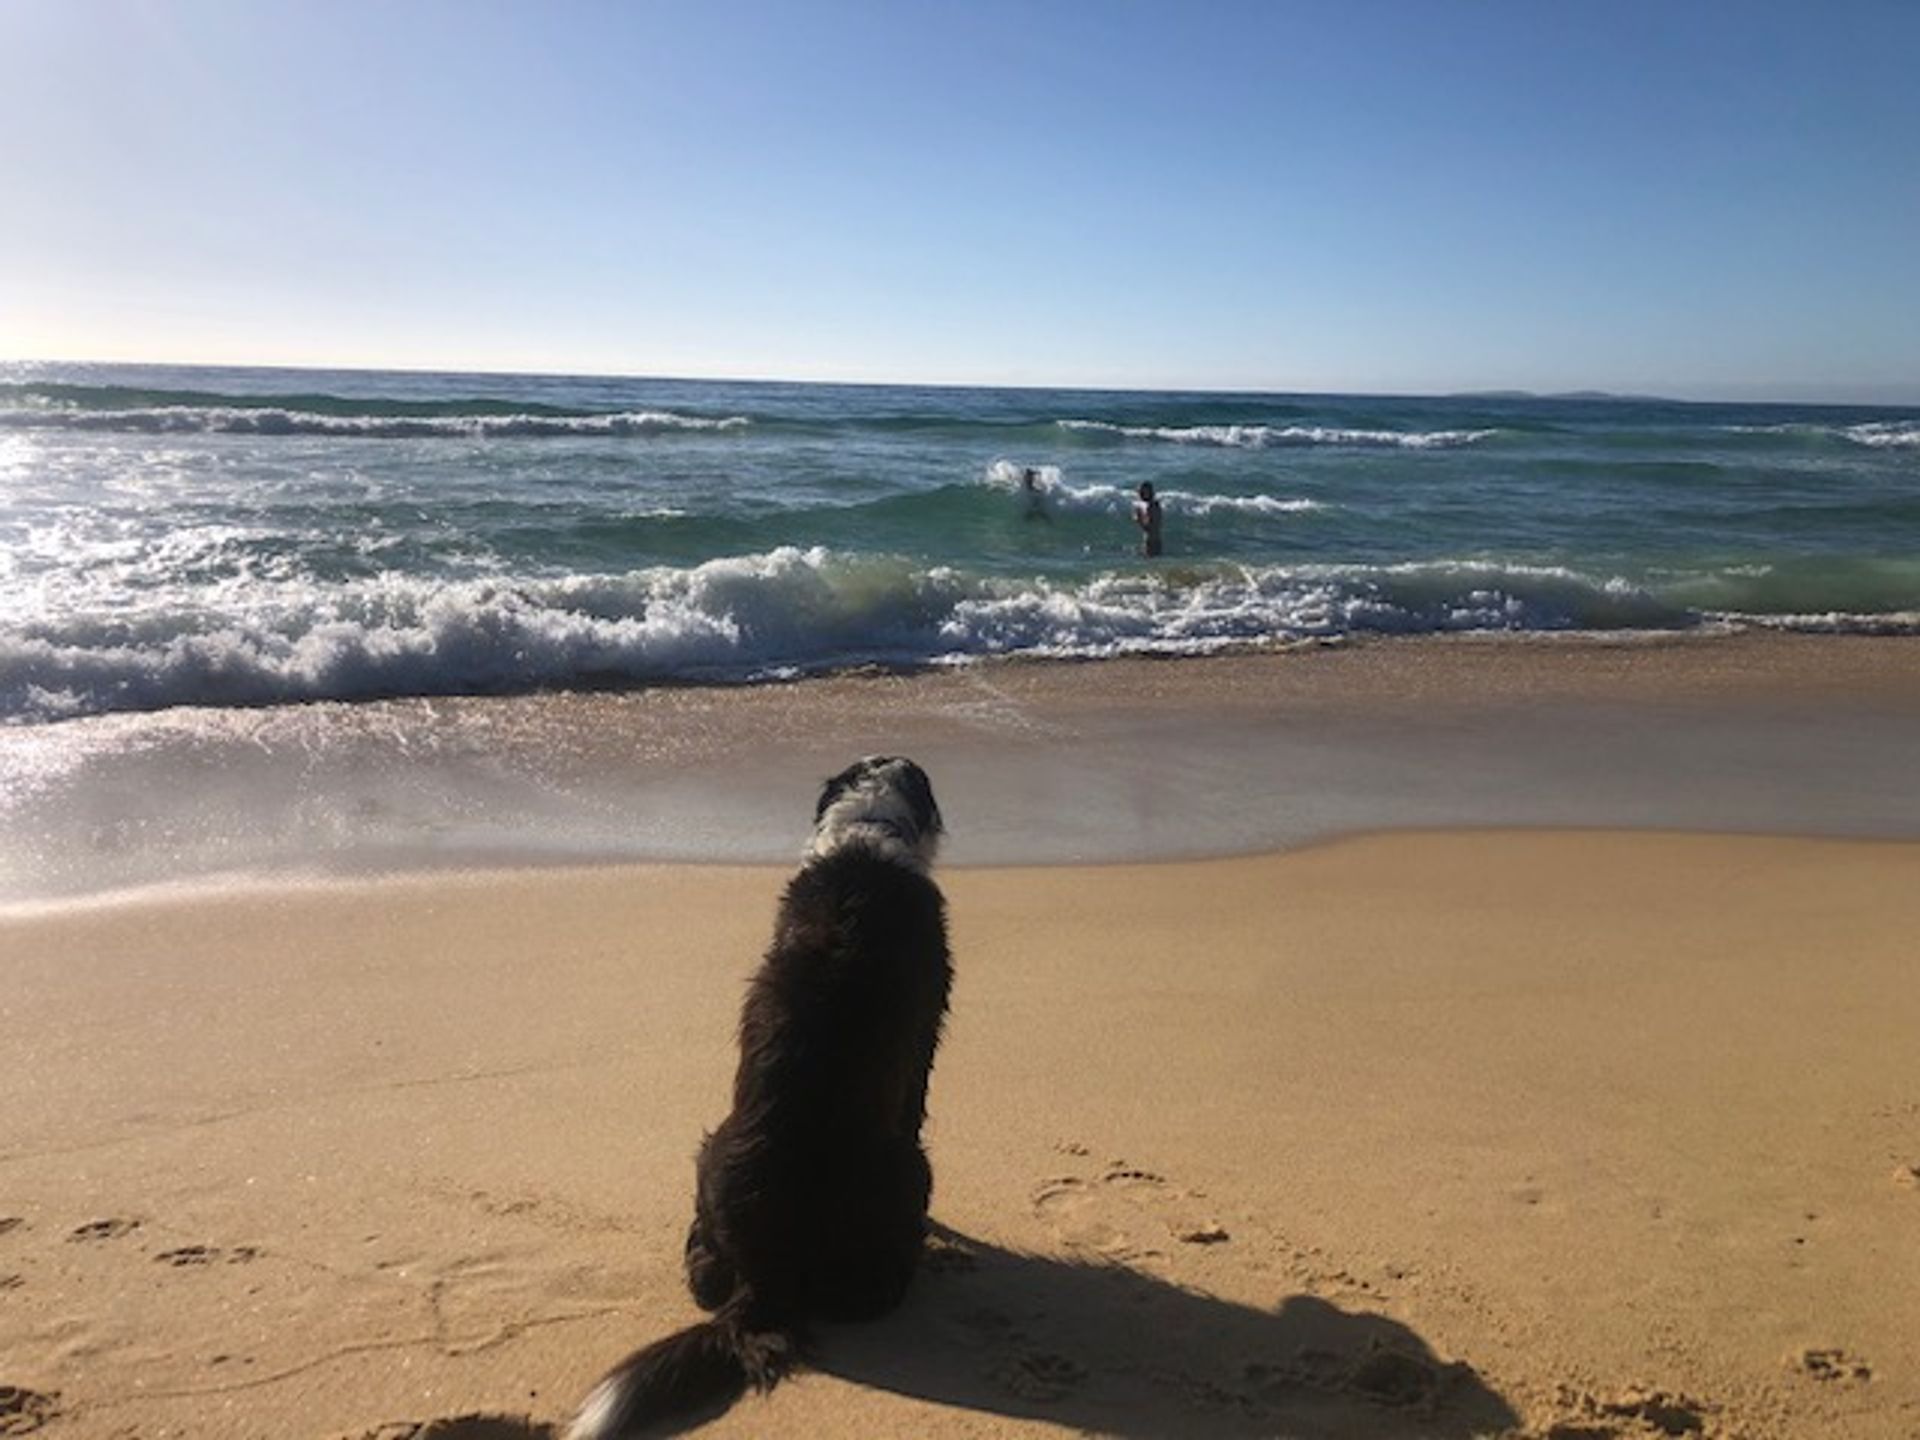 Kelly's dog watching the wave action